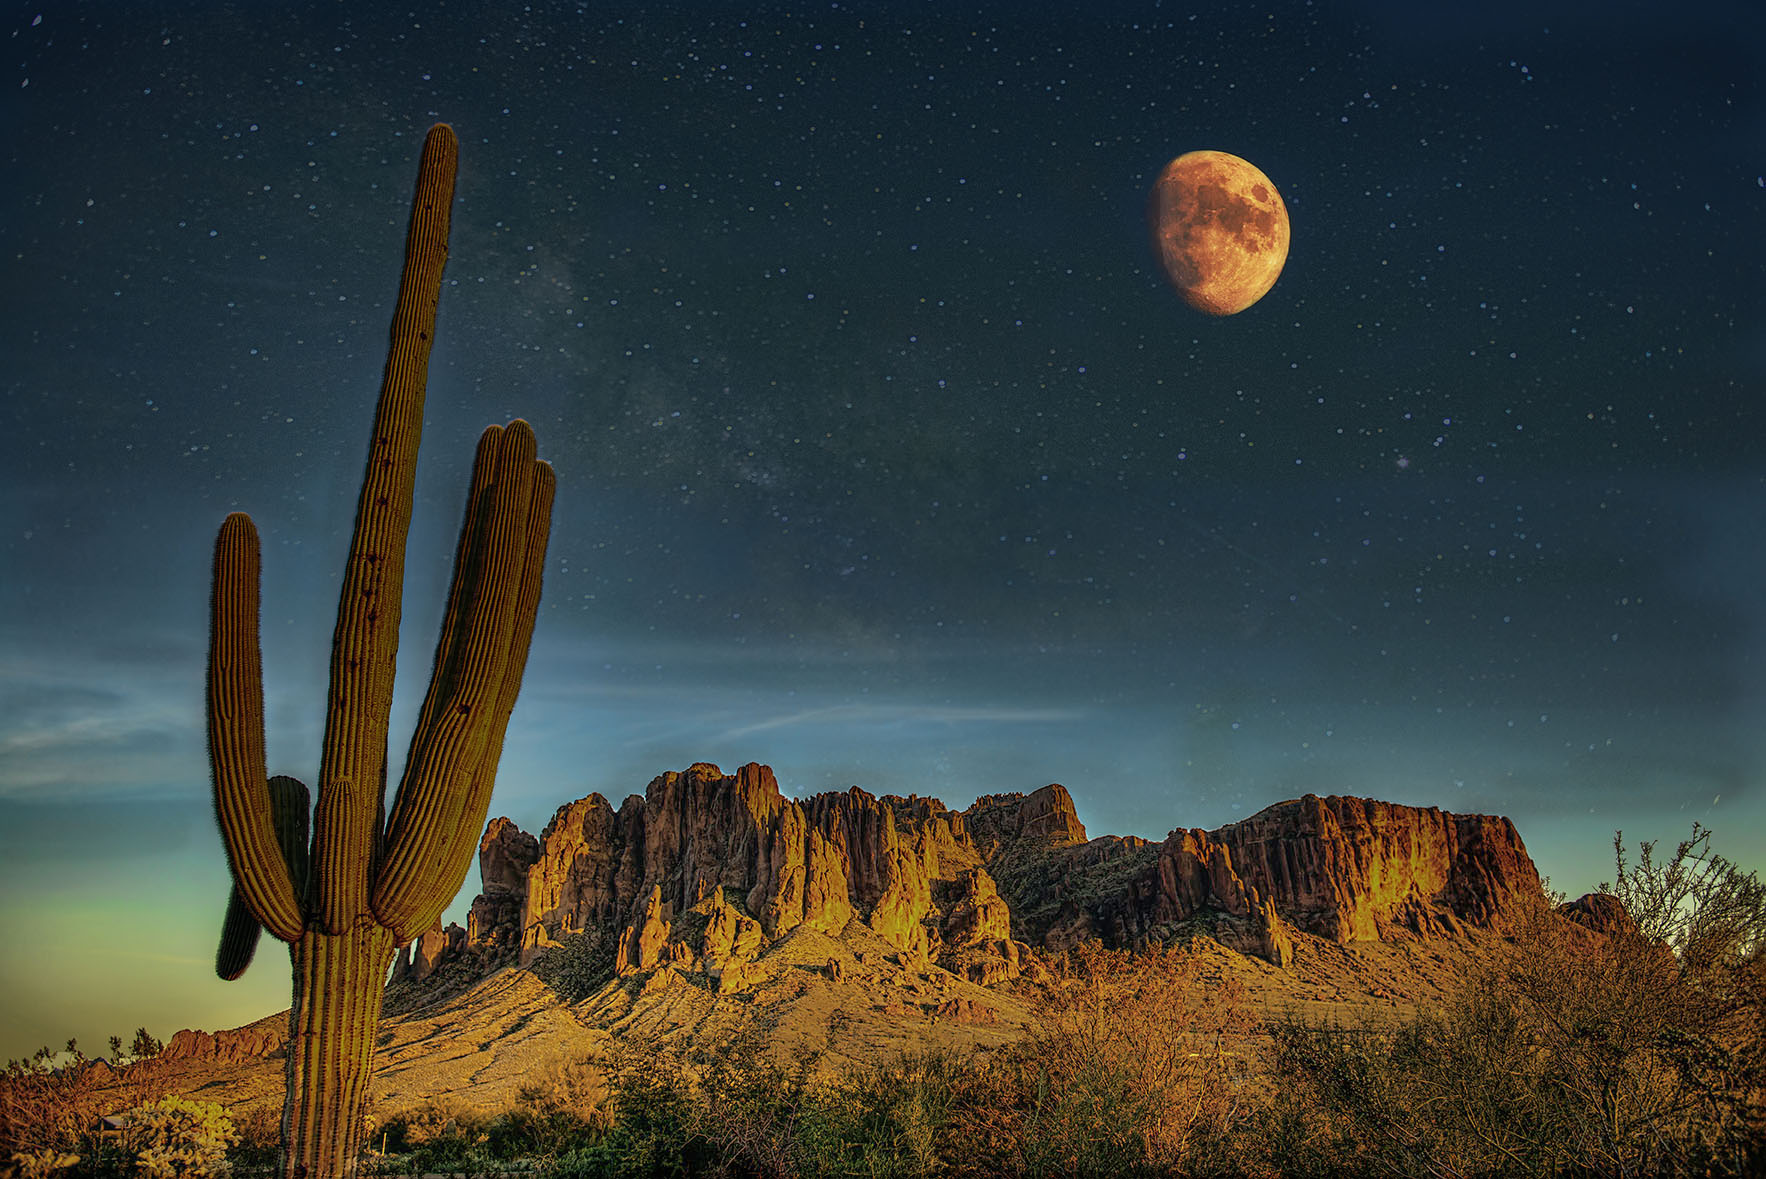 Full moon over a rugged outcropping with cactus in foreground.